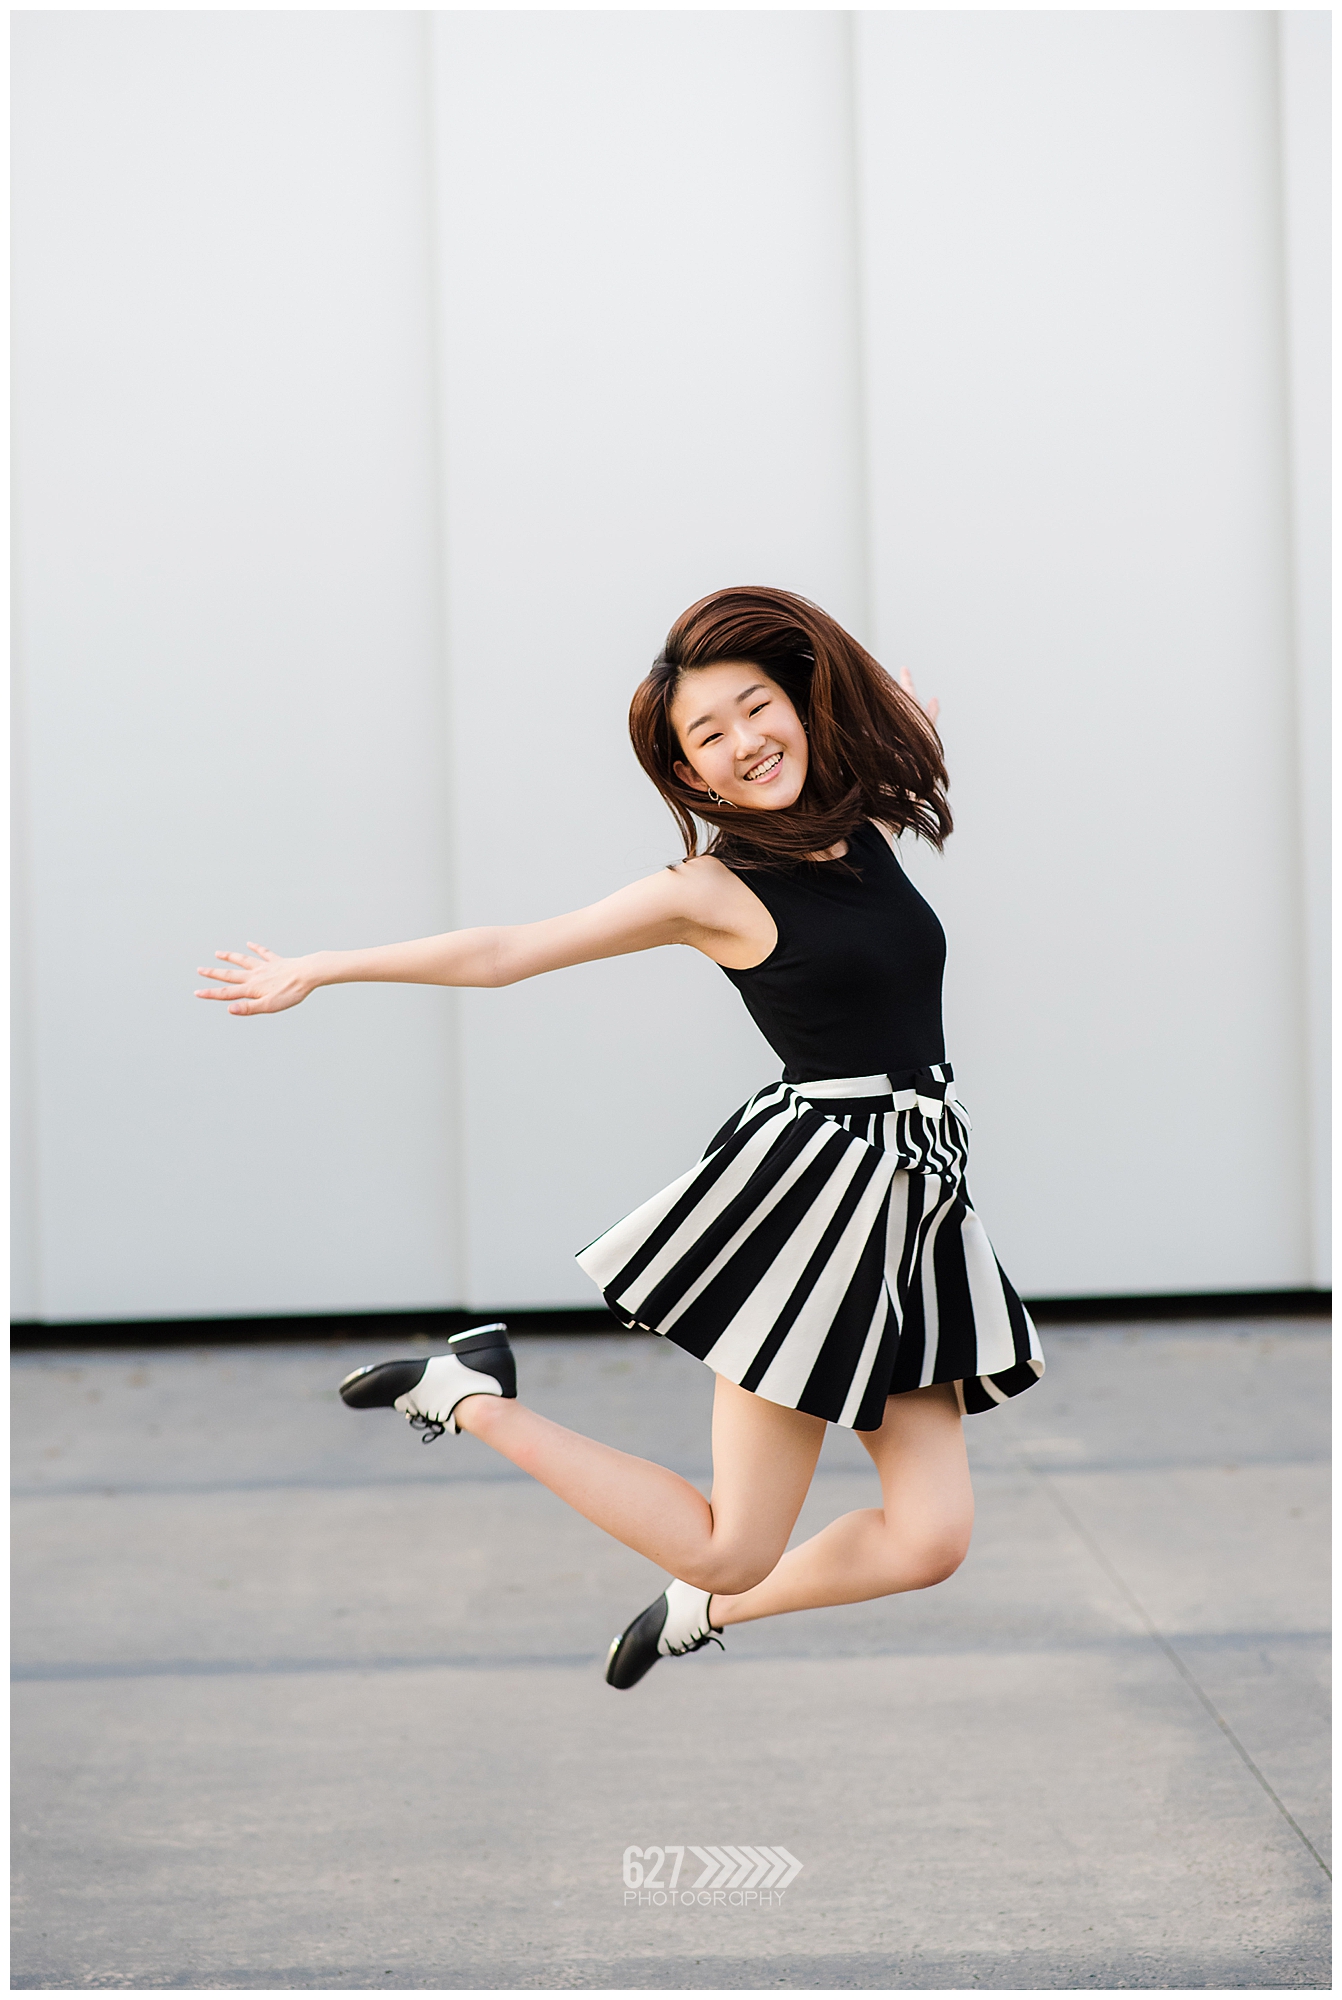 Senior girl with tap shoes jumping